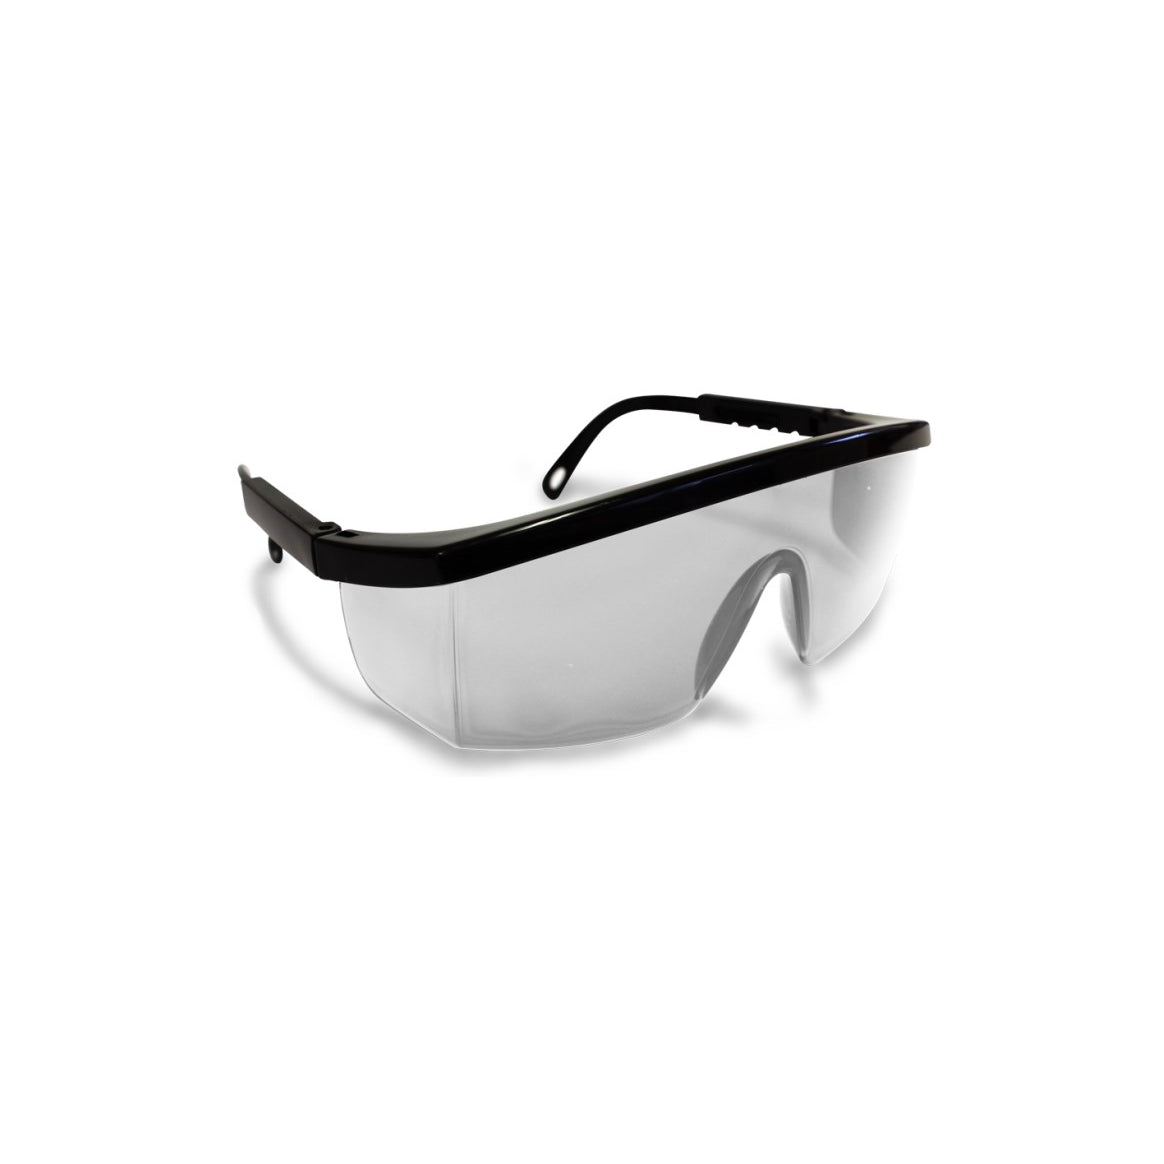 Workhorse® Beretta Safety Glasses, Clear Lens